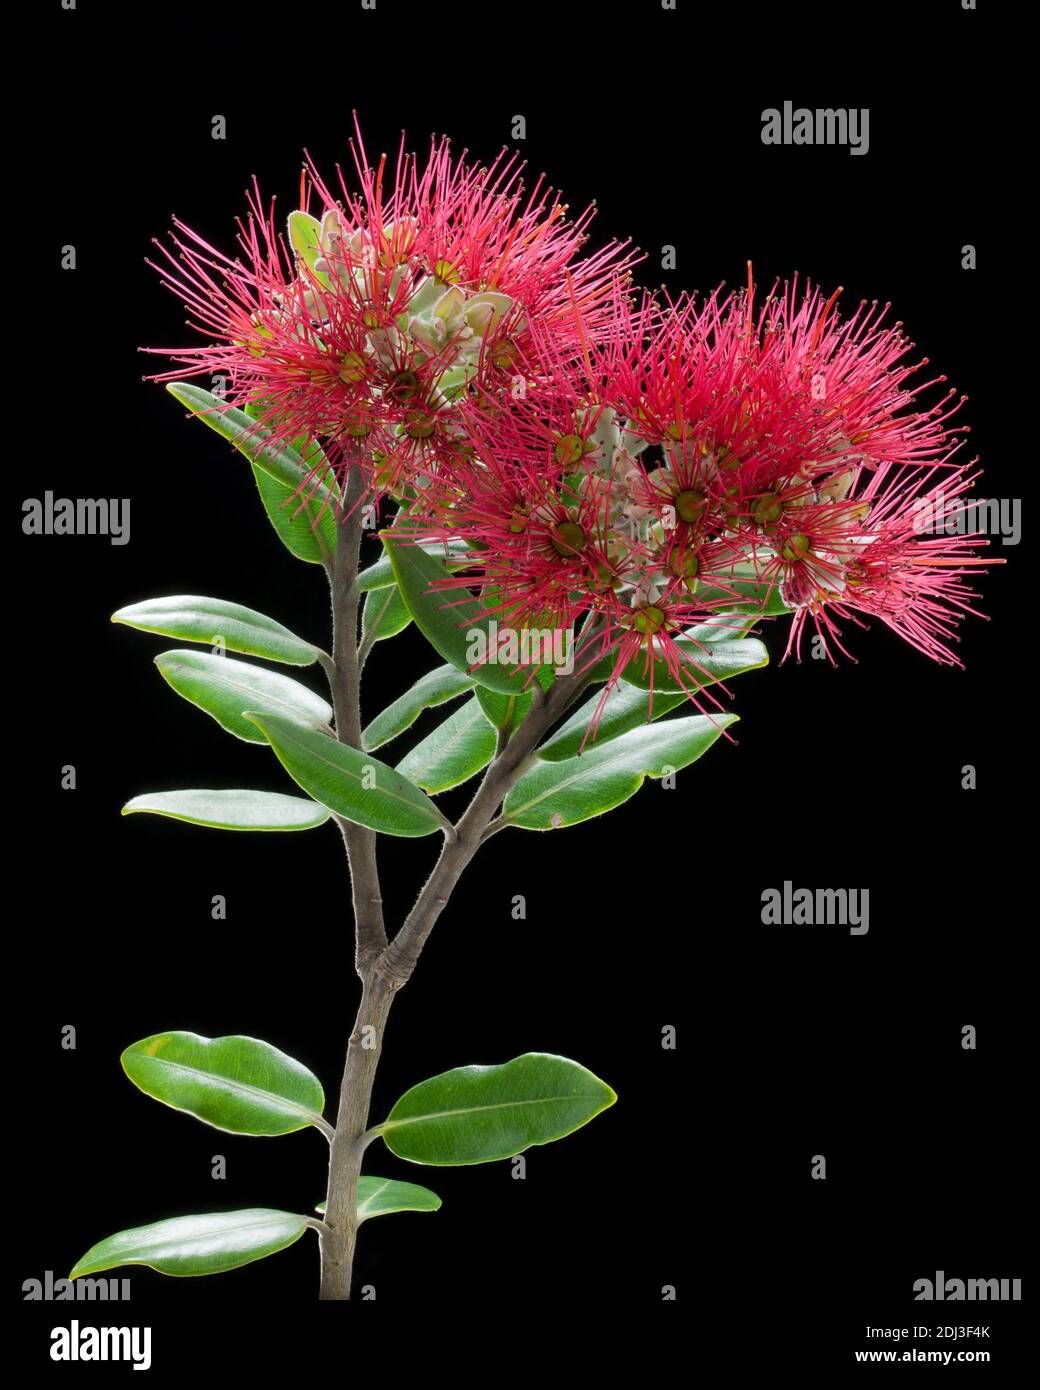 Flowers and leaves of the New Zealand pohutukawa tree against a black background Stock Photo